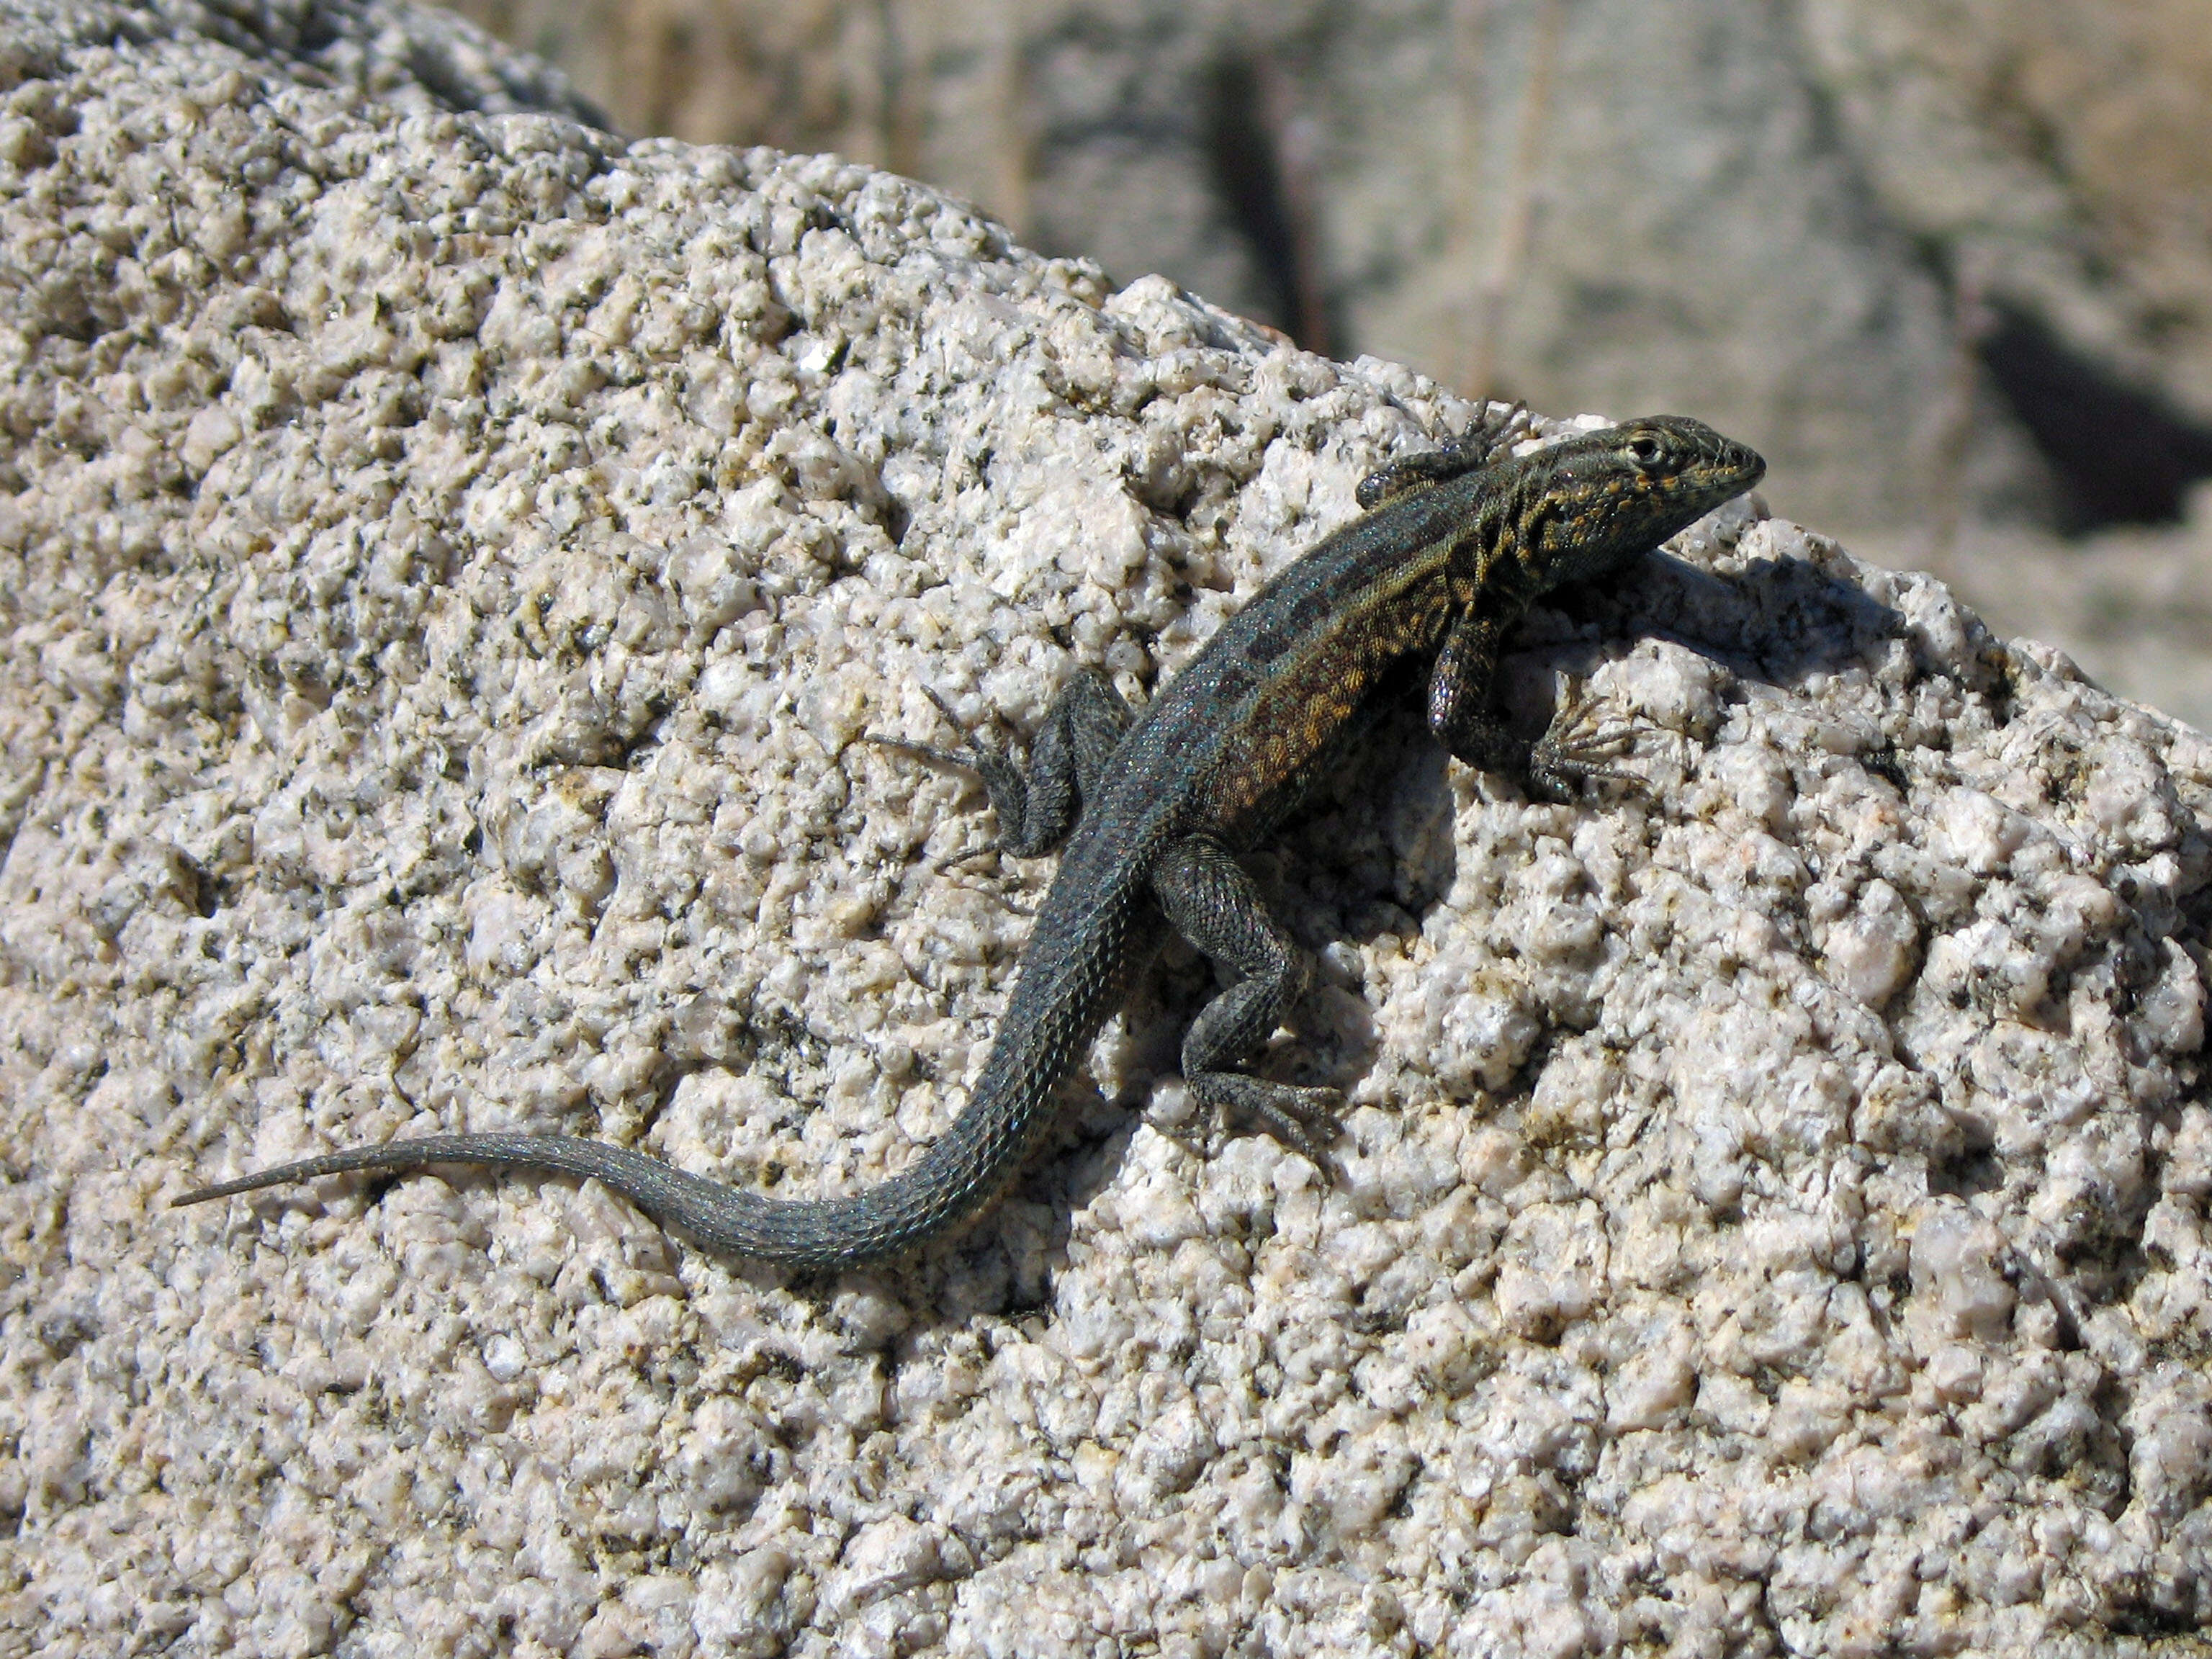 Image of common side-blotched lizard